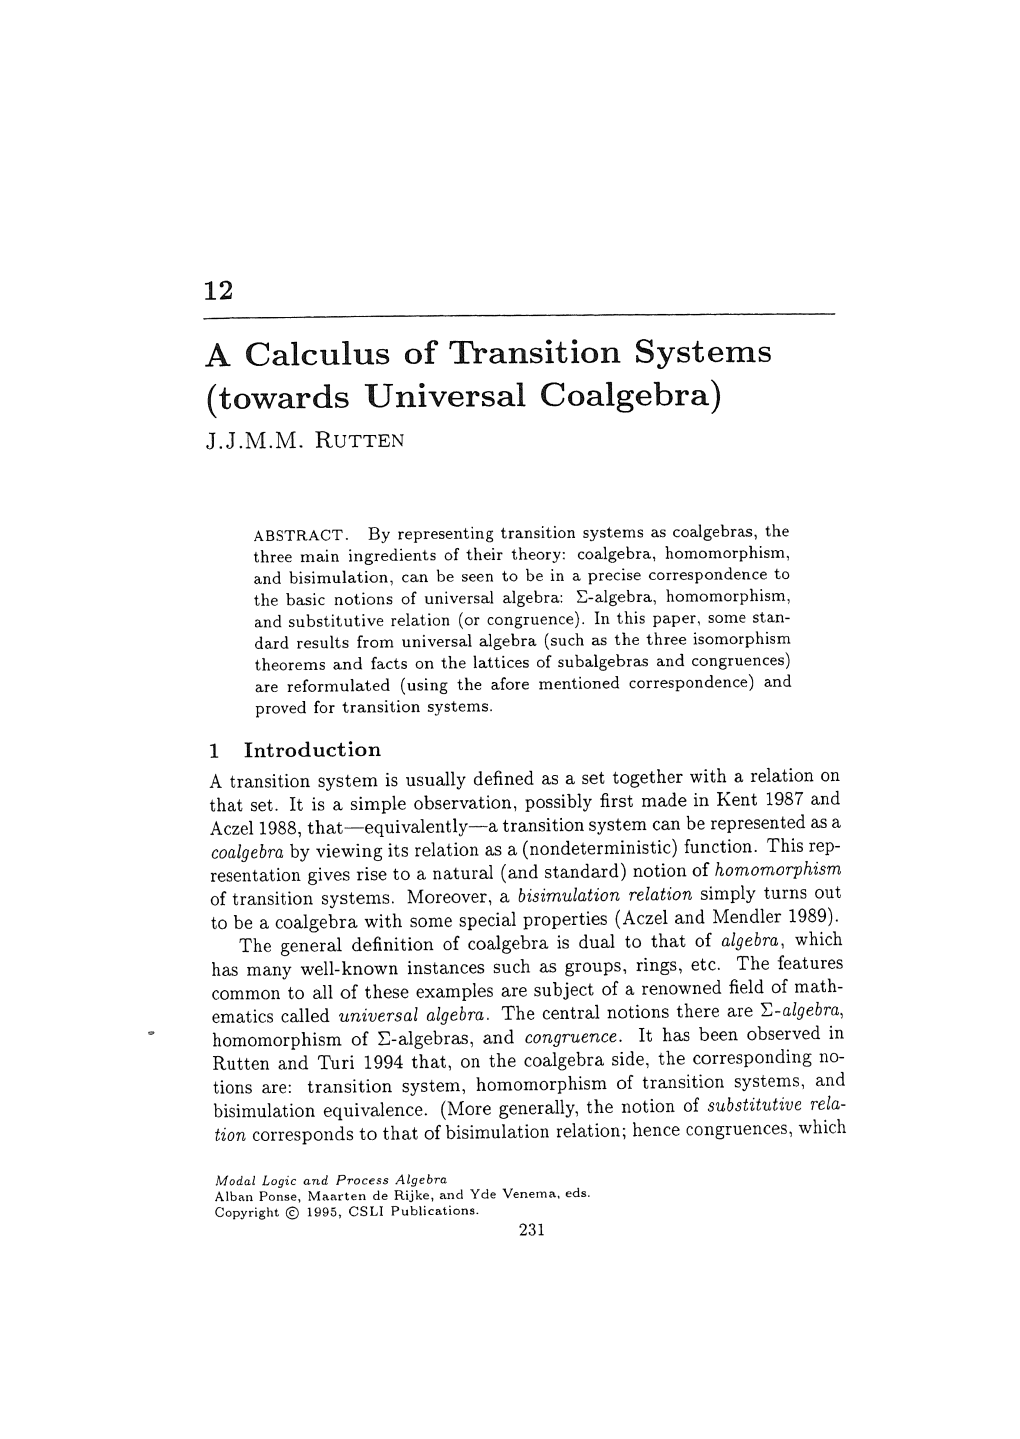 A Calculus of Transition Systems (Towards Universal Coalgebra) J.J.M.M